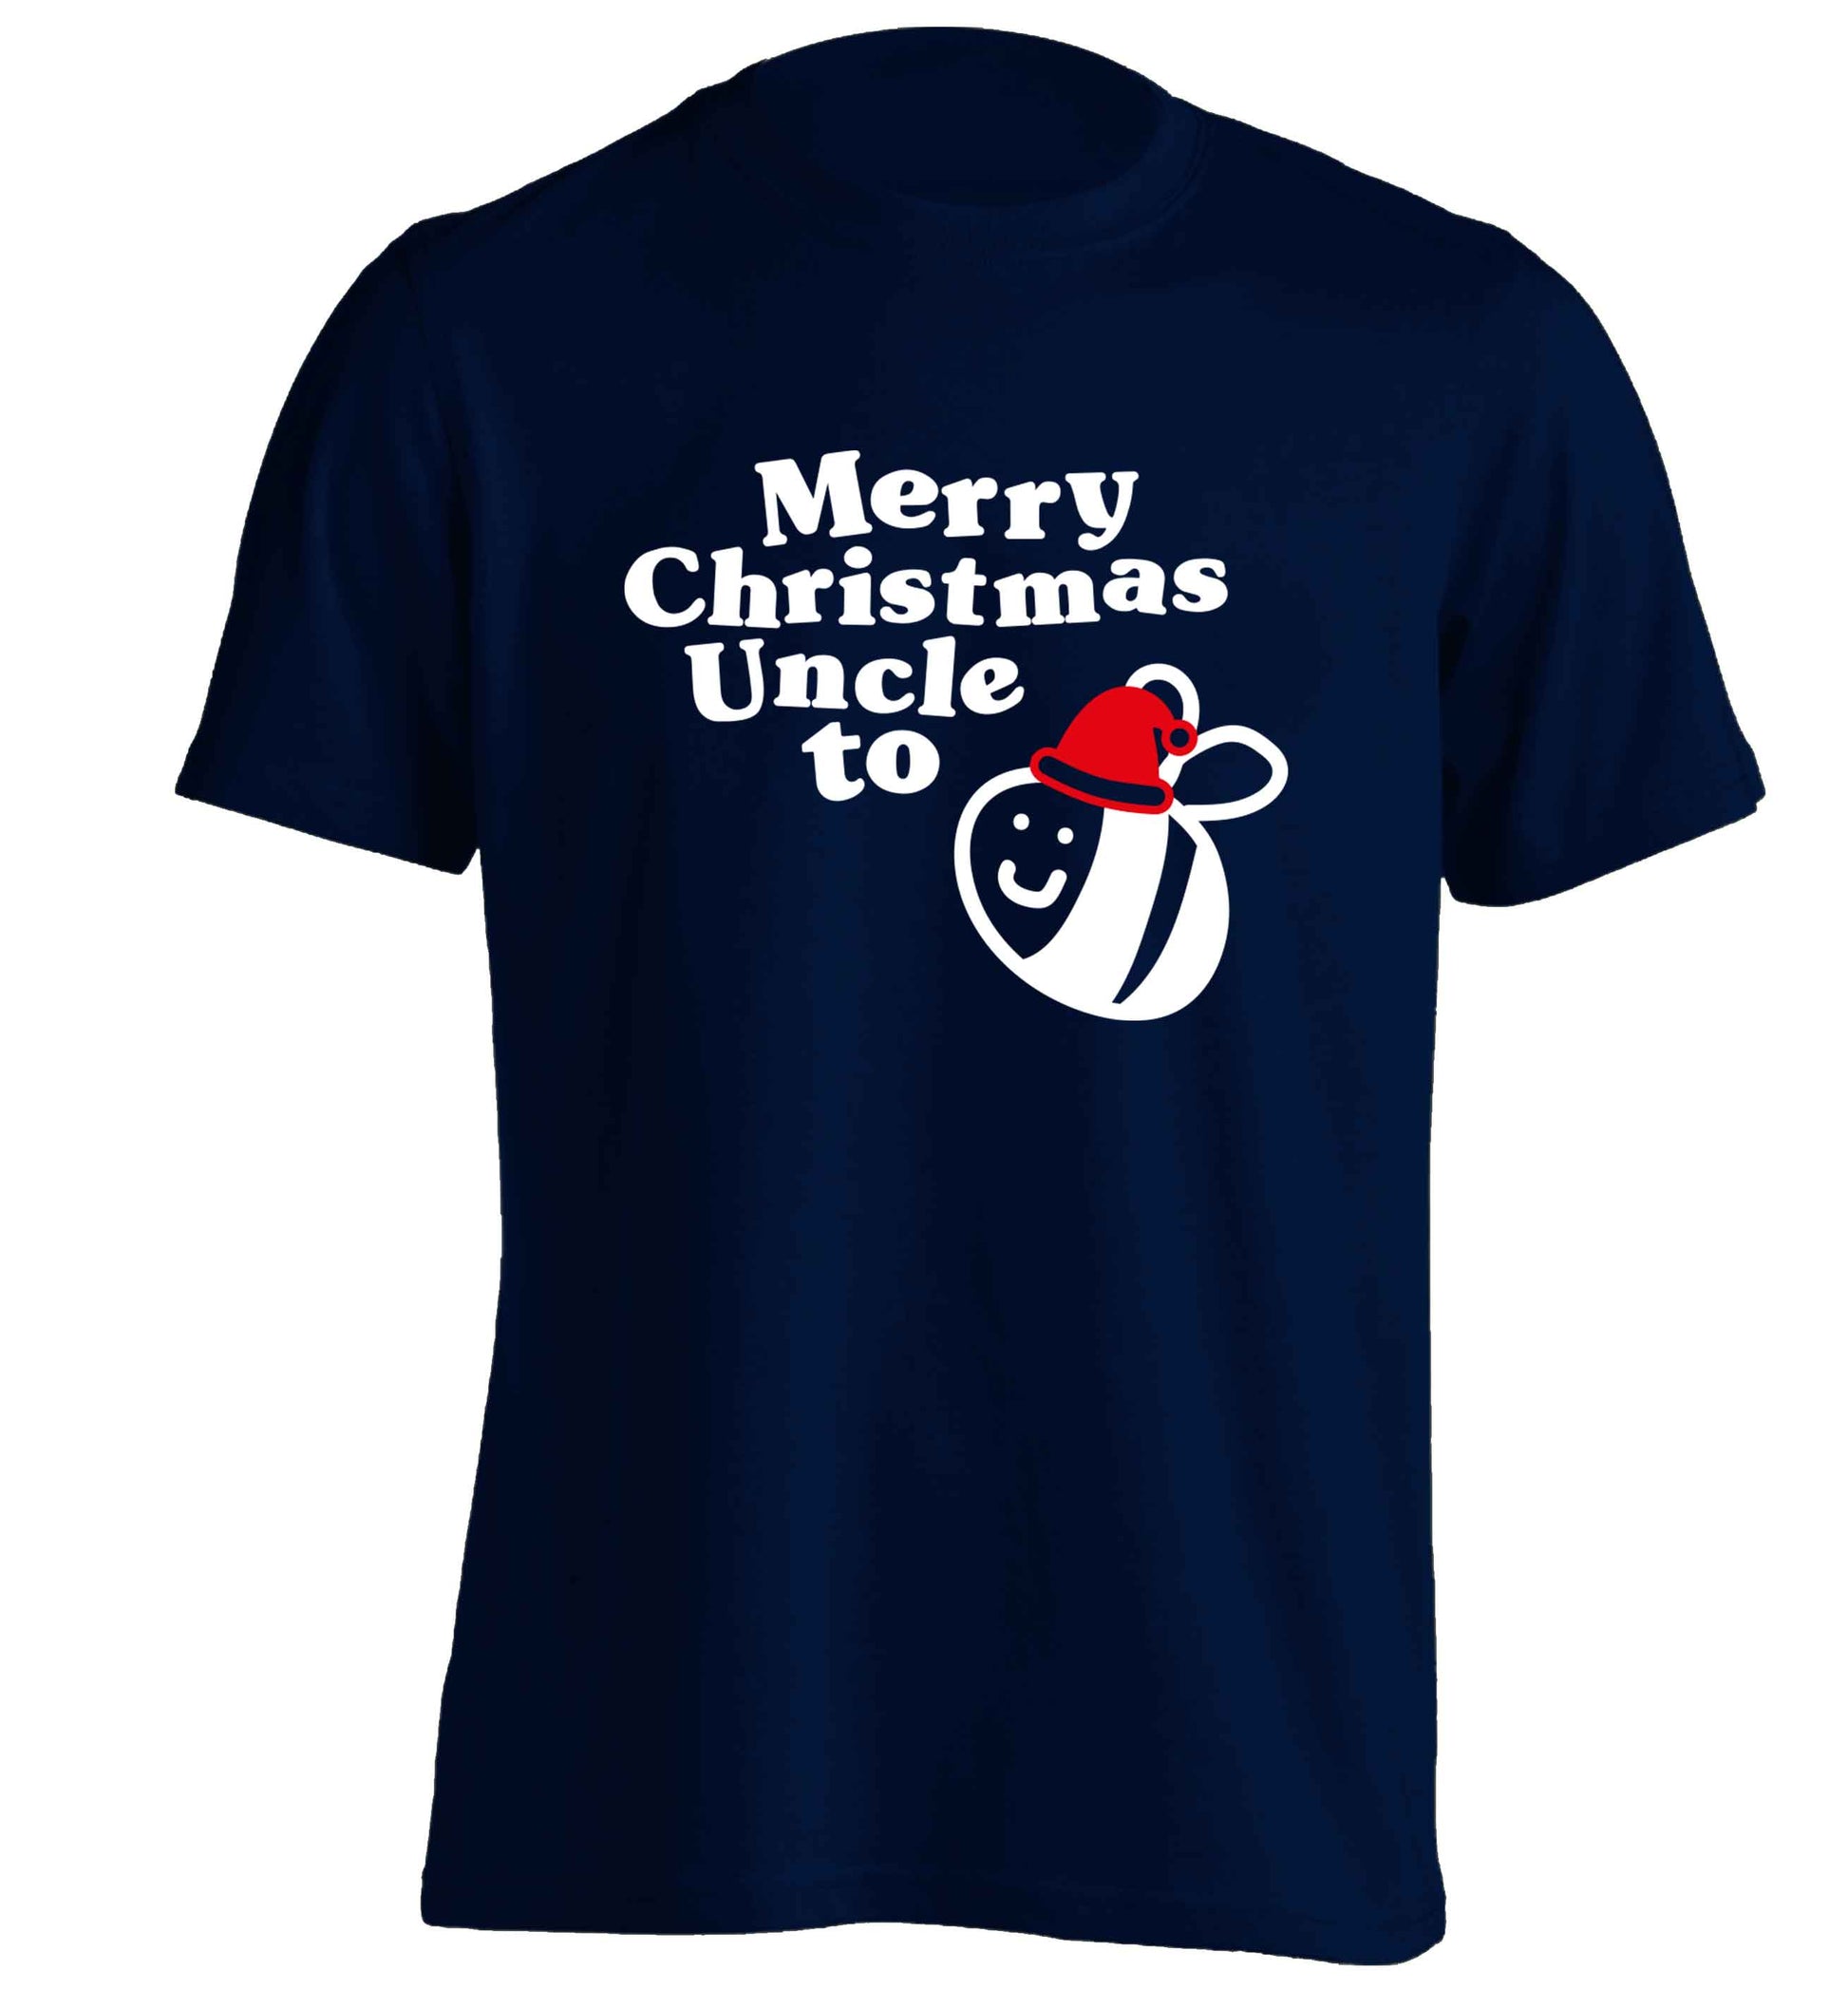 Merry Christmas uncle to be adults unisex navy Tshirt 2XL